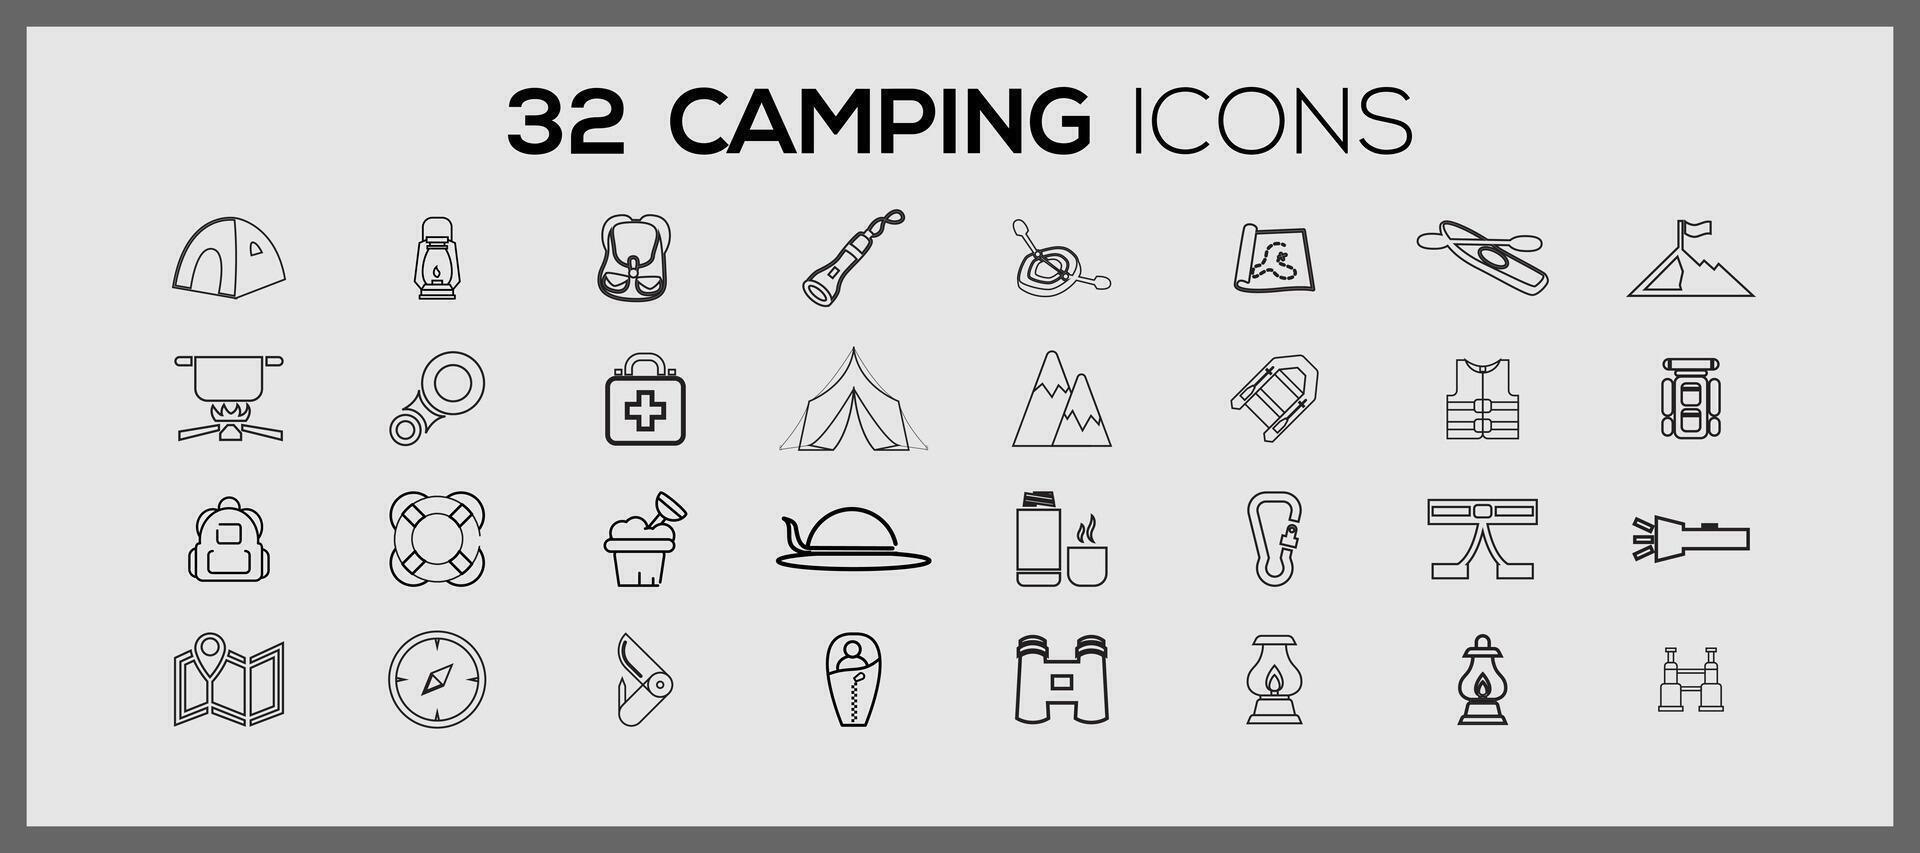 Camping icons set. Illustration drawing style of camping icons collection.Camping icons collection. vector